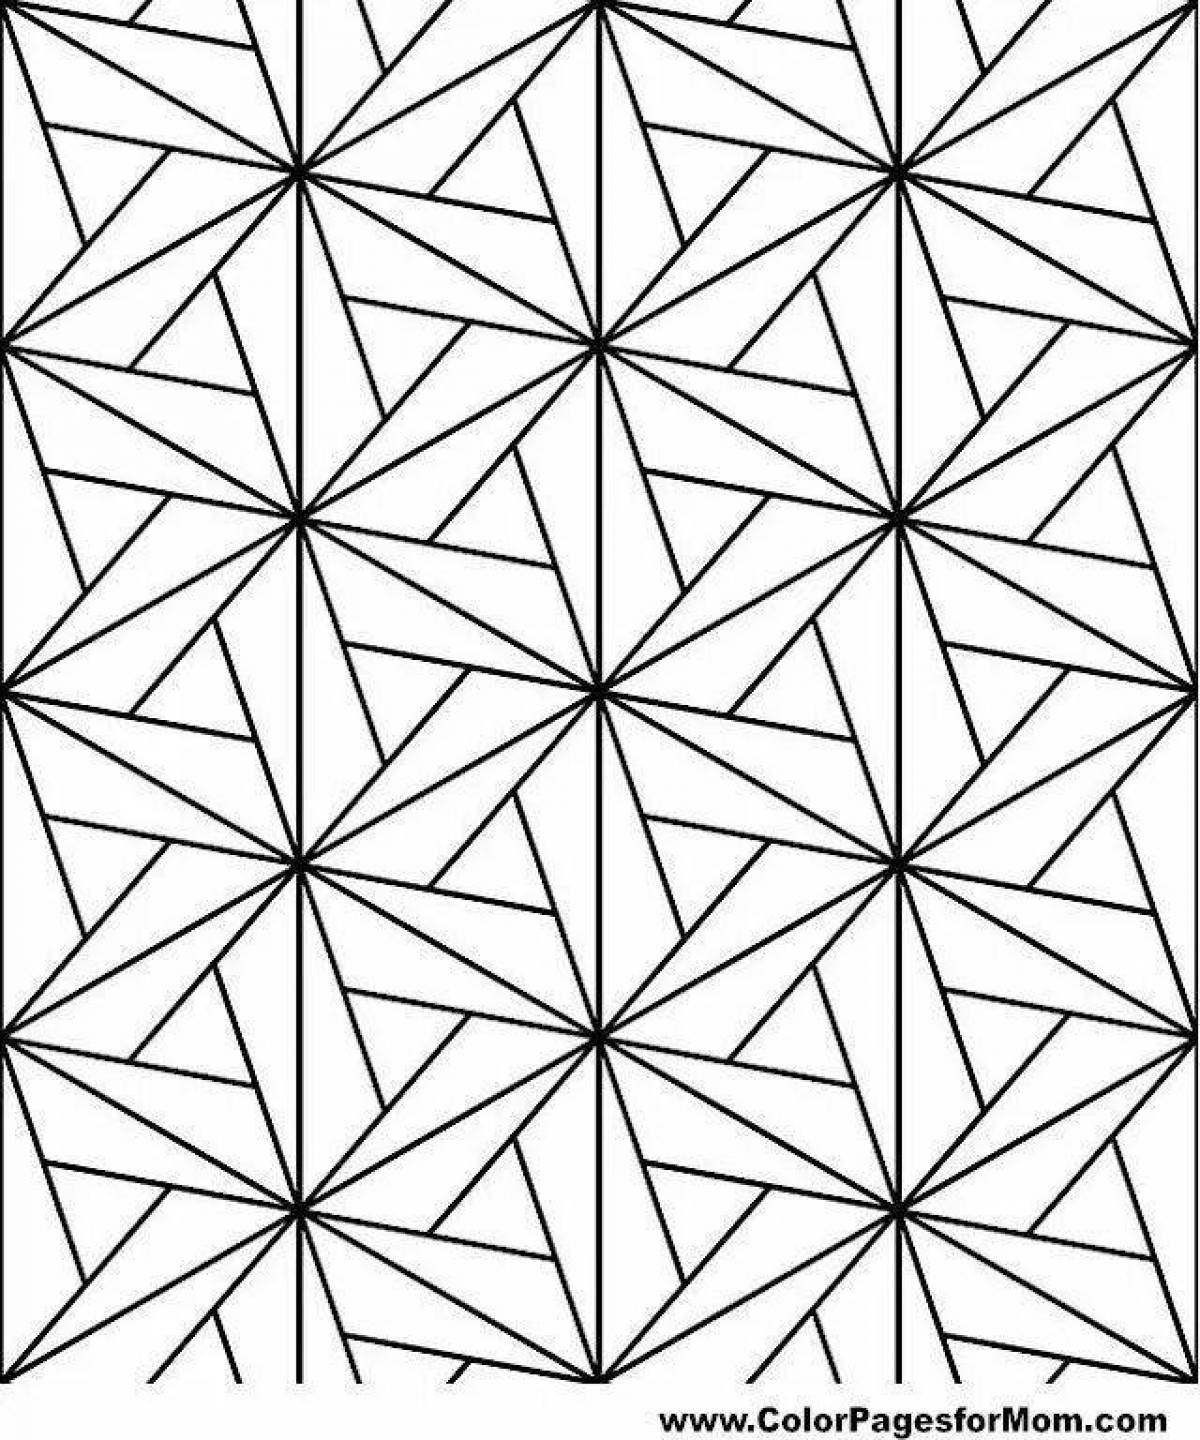 A striking geometry coloring page